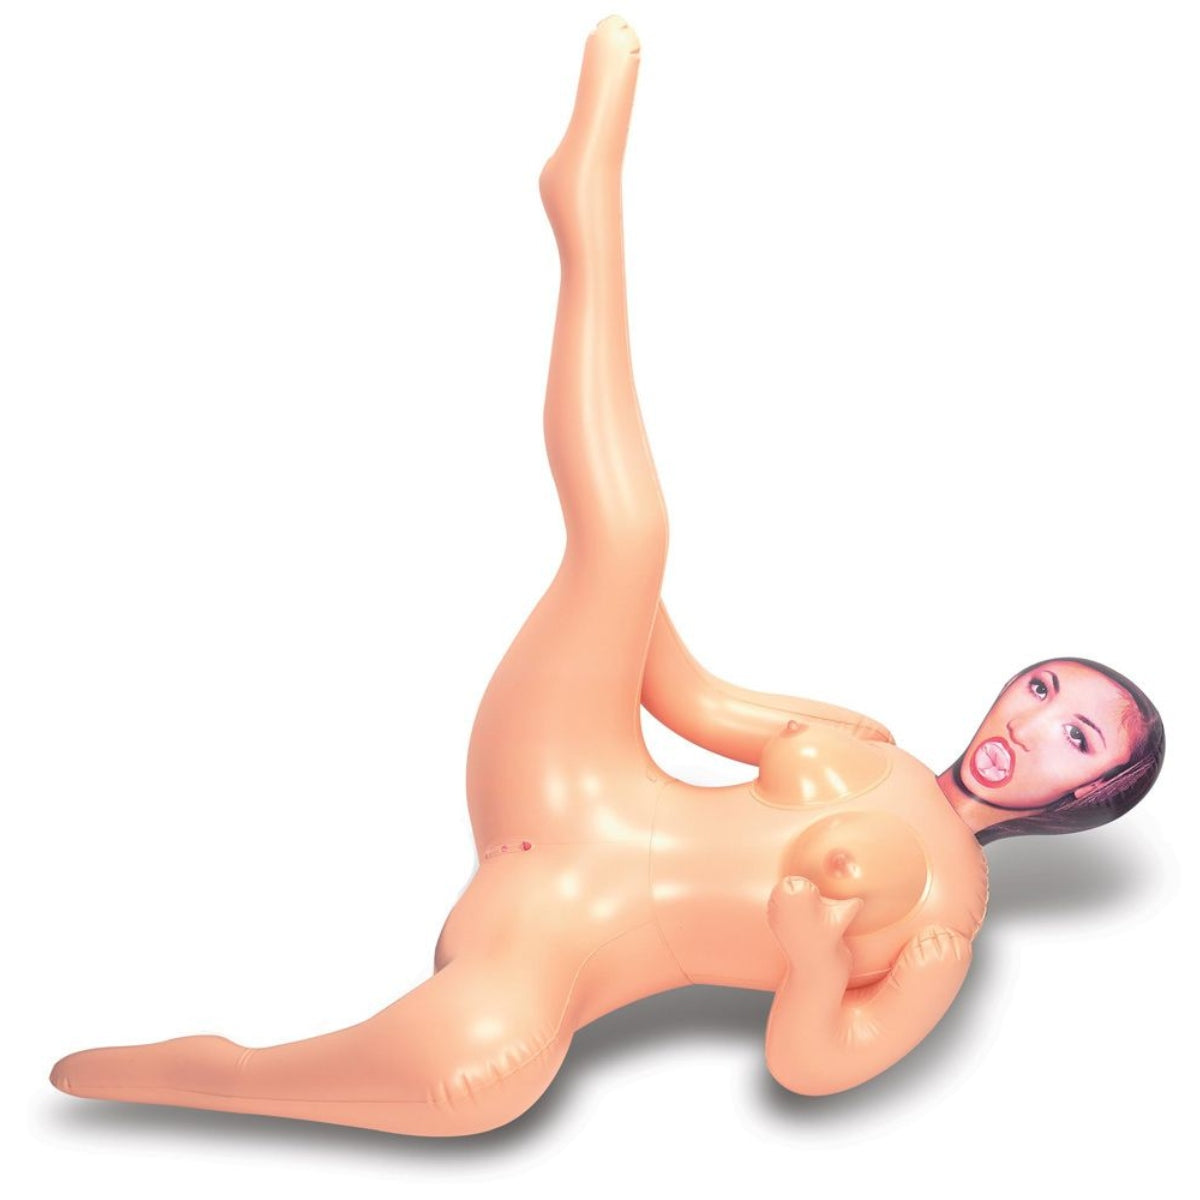 Nanma Dianna Stretch Inflatable Life Size Sex Doll